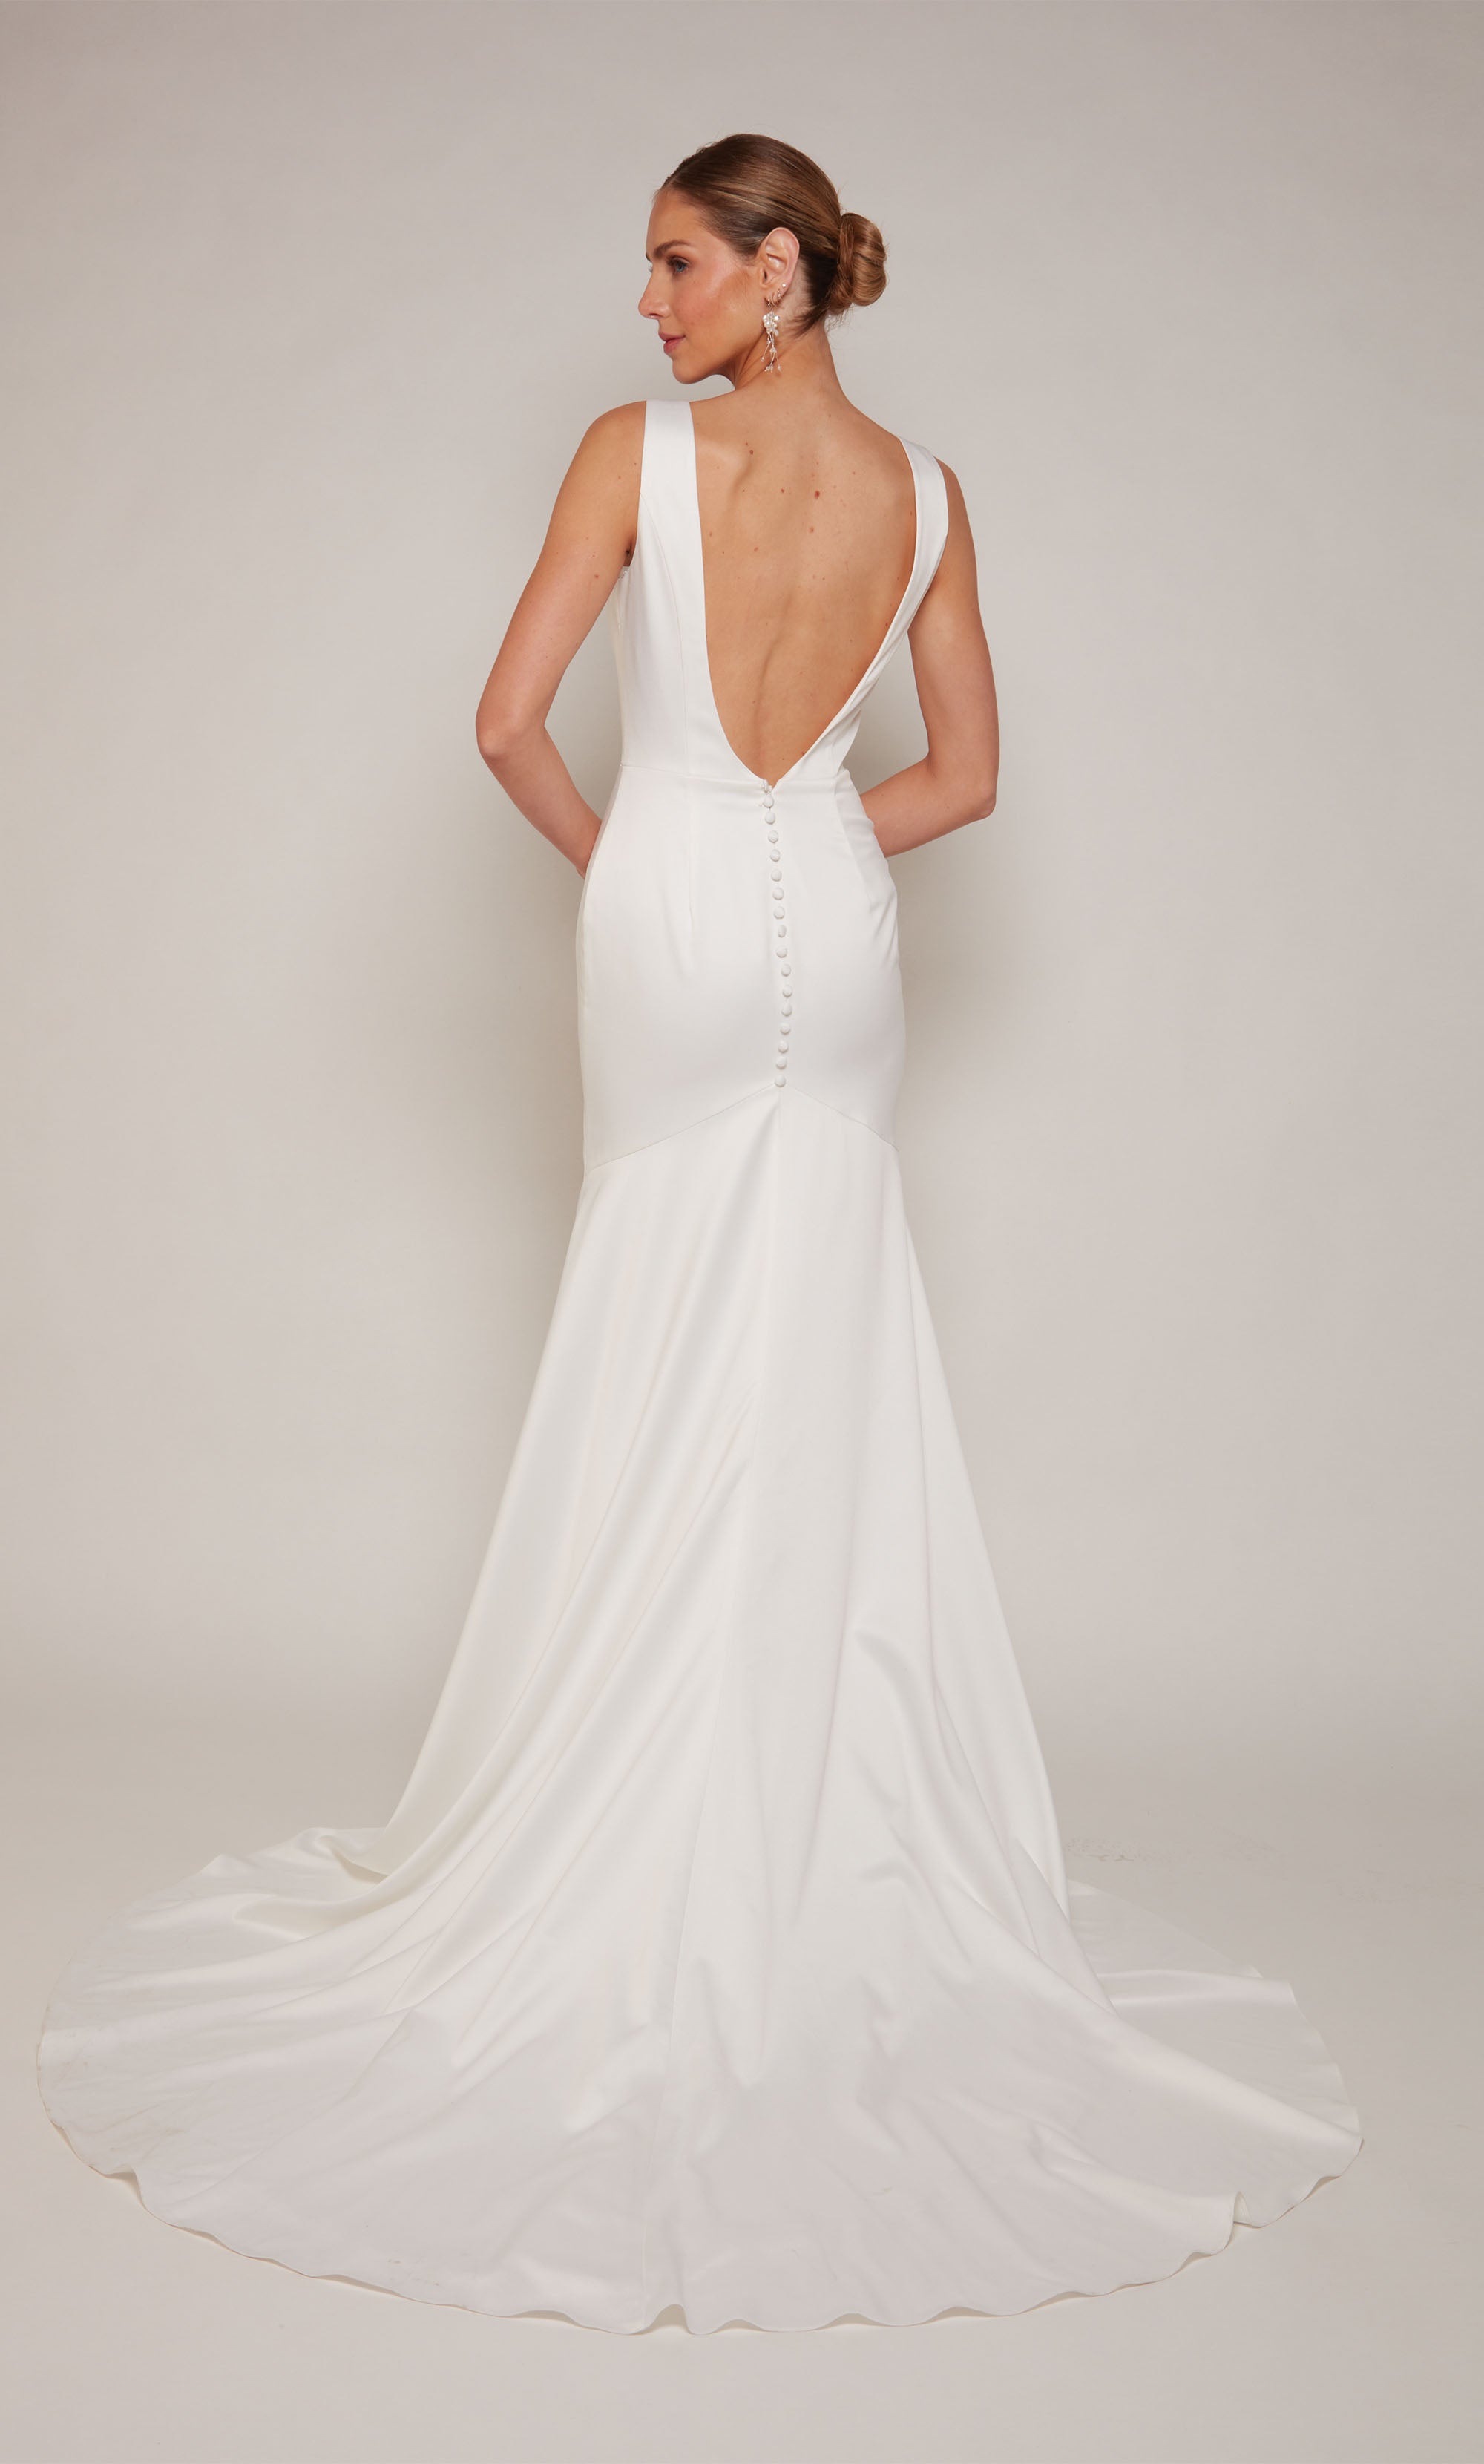 A white, satin wedding gown with an illusion deep V-neckline and elegant side slit.